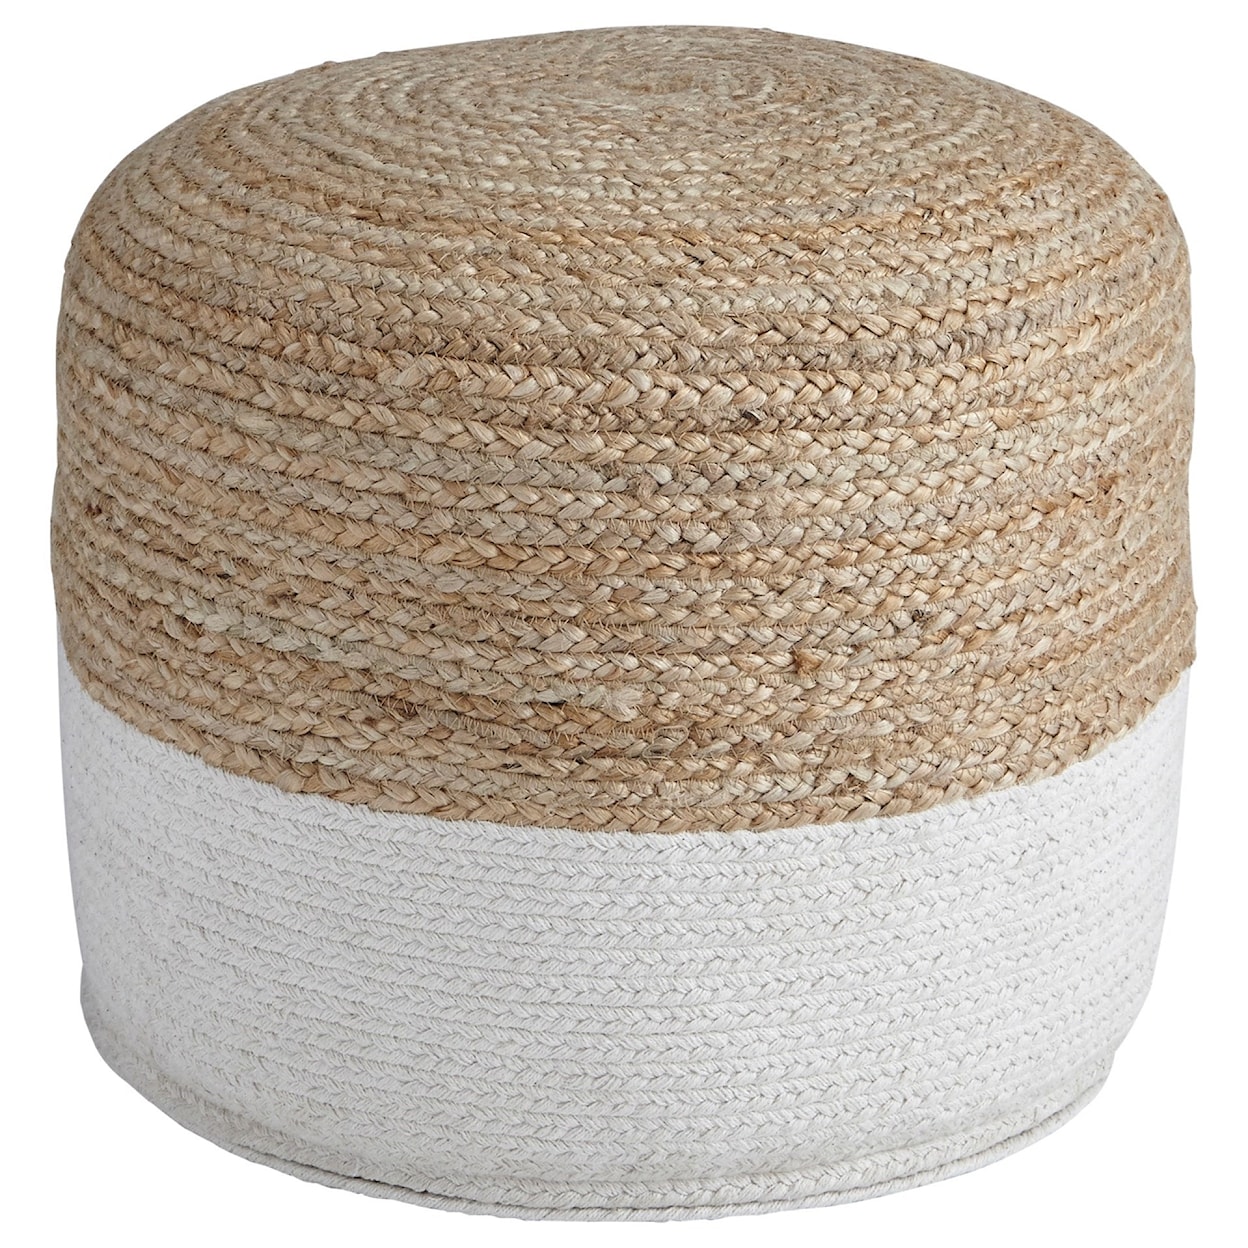 Ashley Furniture Signature Design Poufs Sweed Valley - Natural/White Pouf